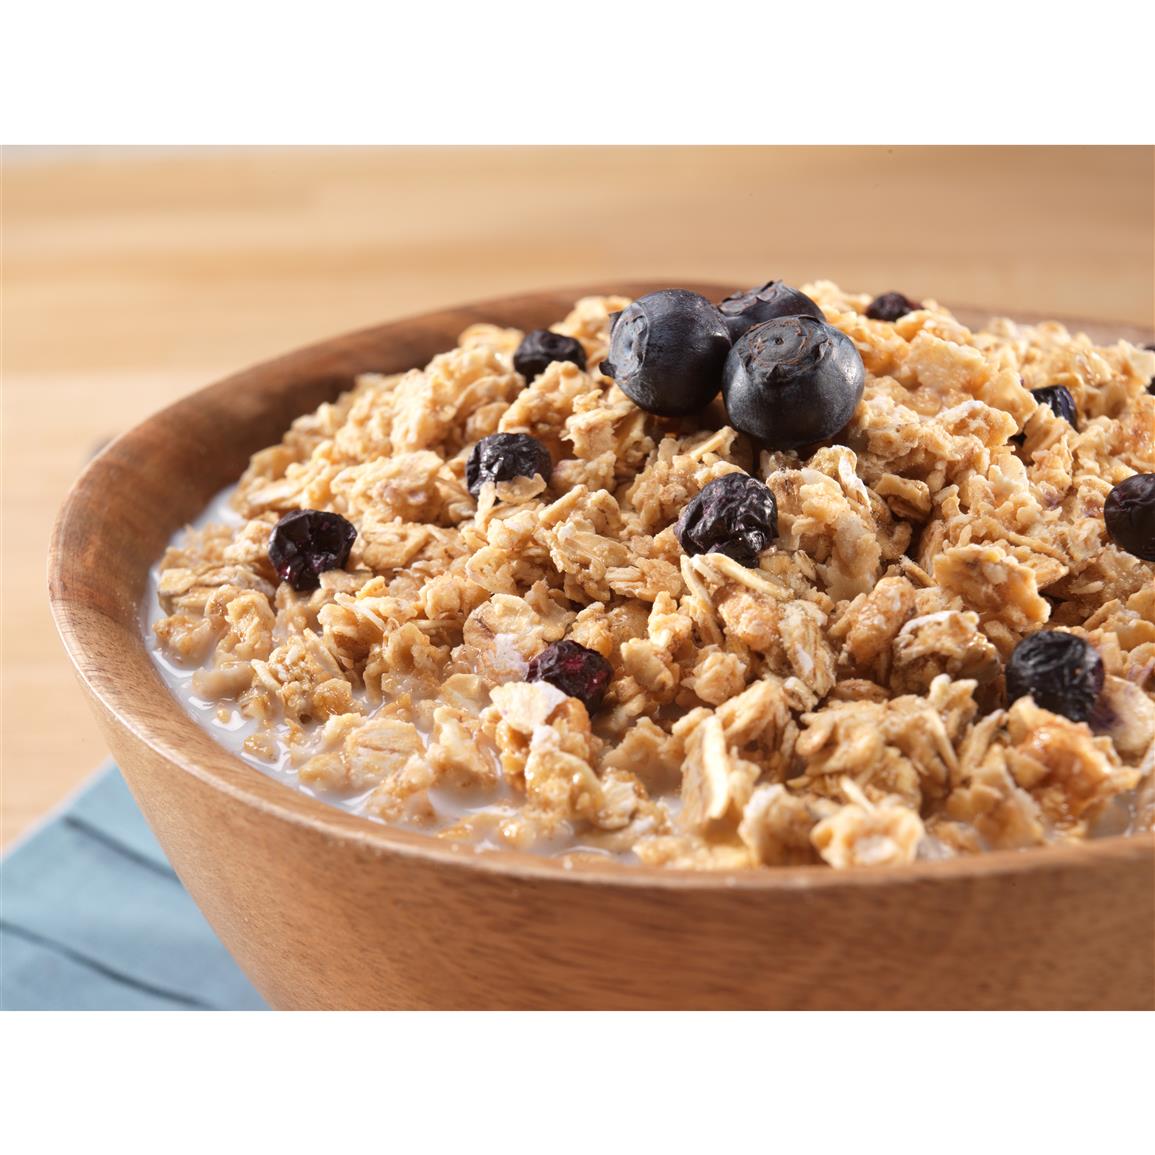 3-Pk. Mountain House Granola with Milk and Blueberries - 627371 ...